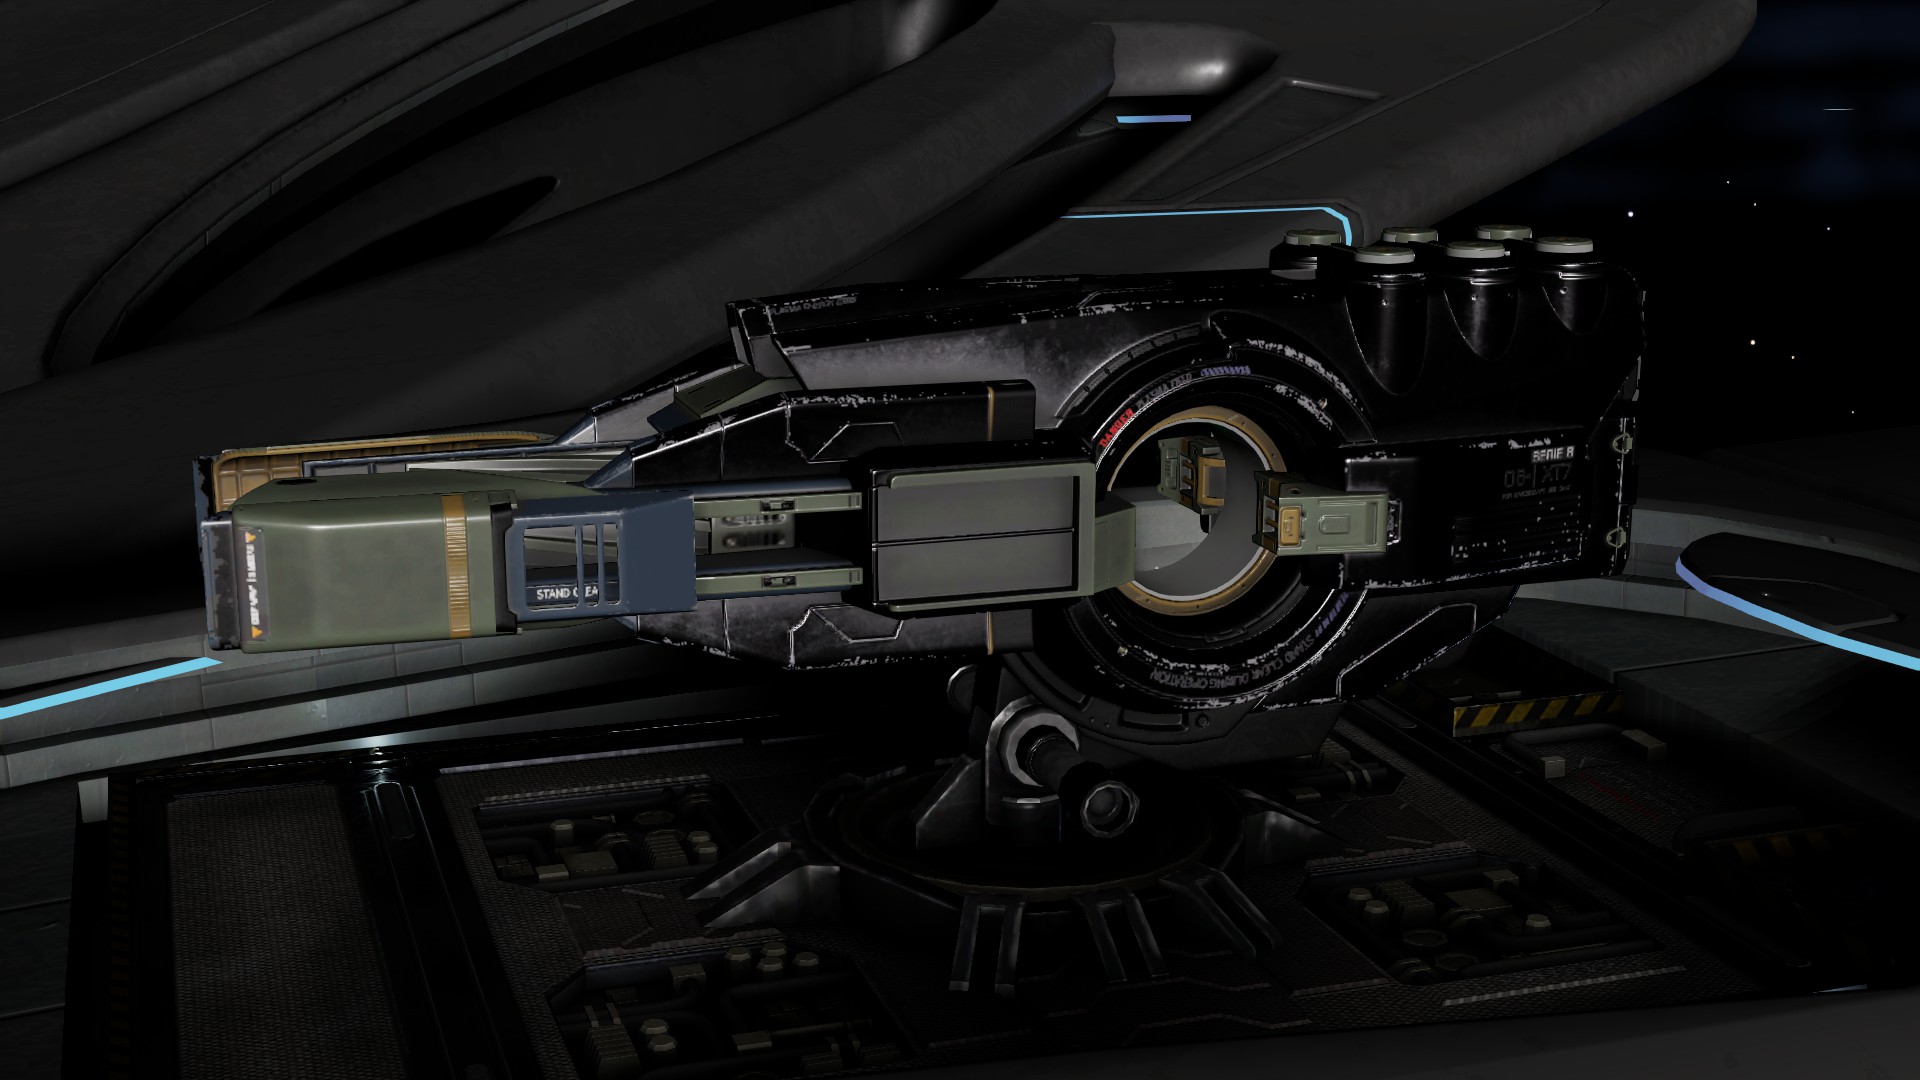 Lasers, Plasma And Multi-Cannons - A Look At Elite Dangerous